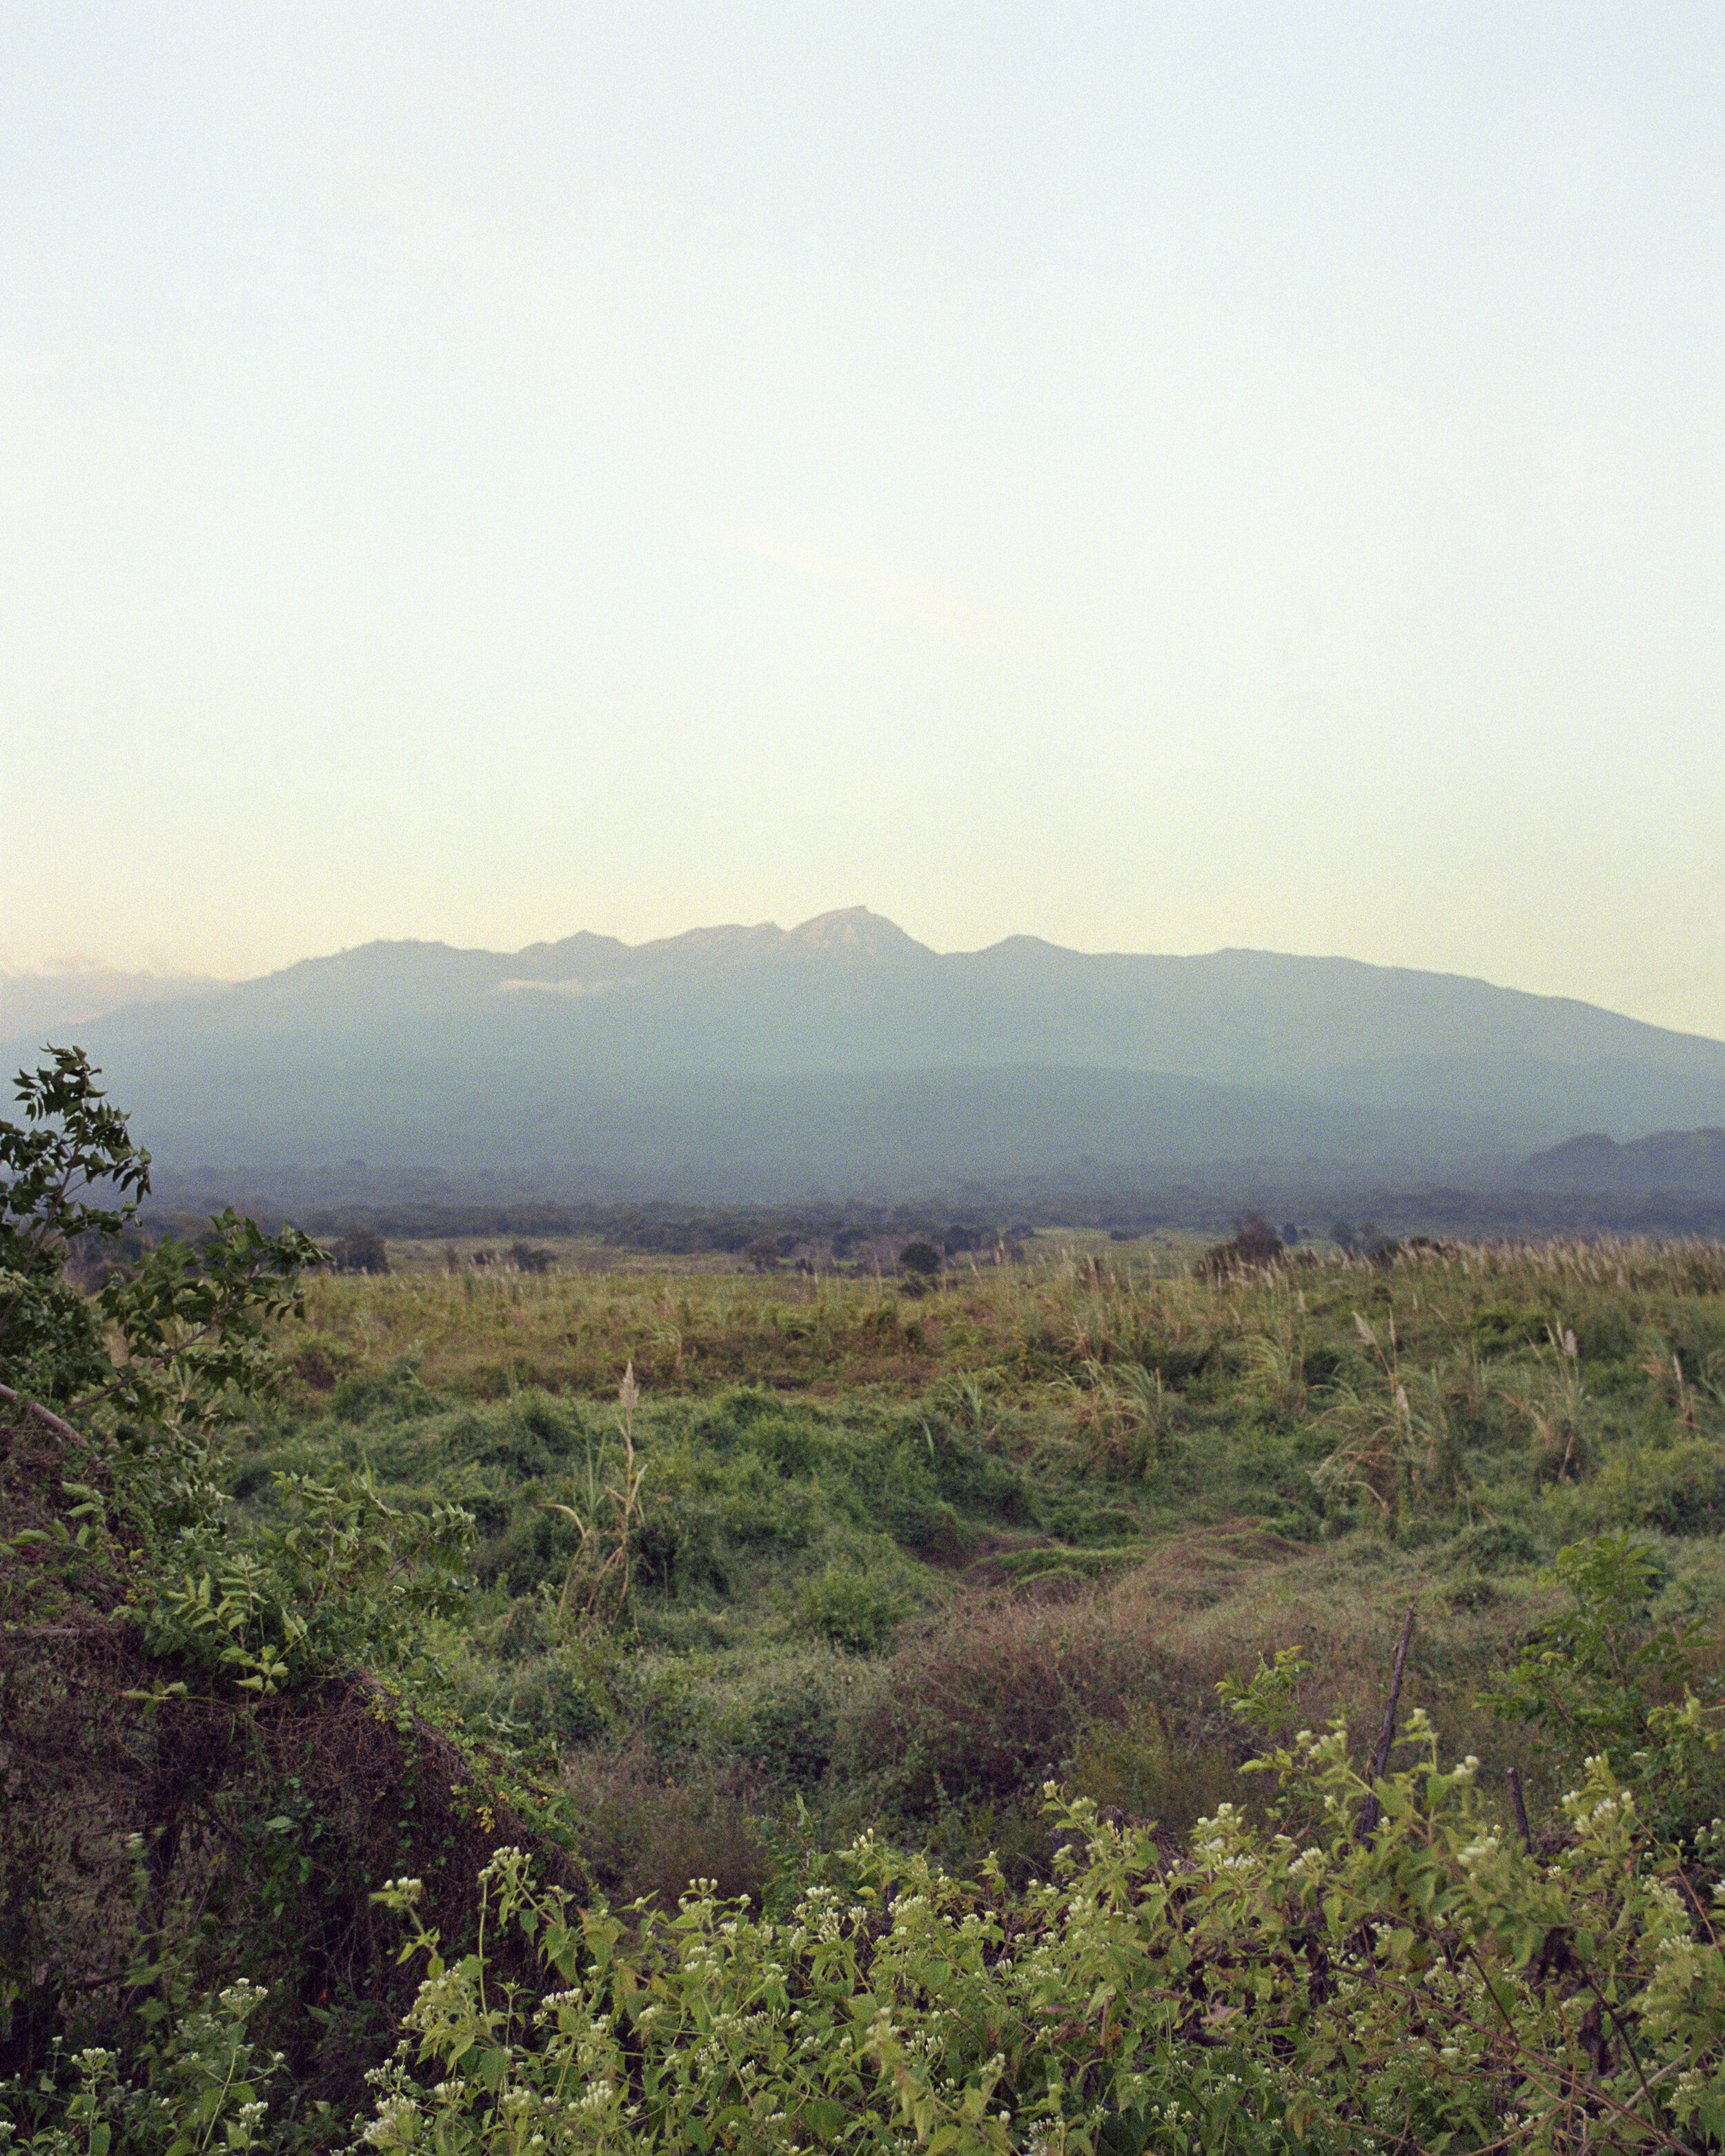  “Mount Tambora”, Archival Pigment Print on Transparency Film mounted to Plexi, 50x40in, 2020 